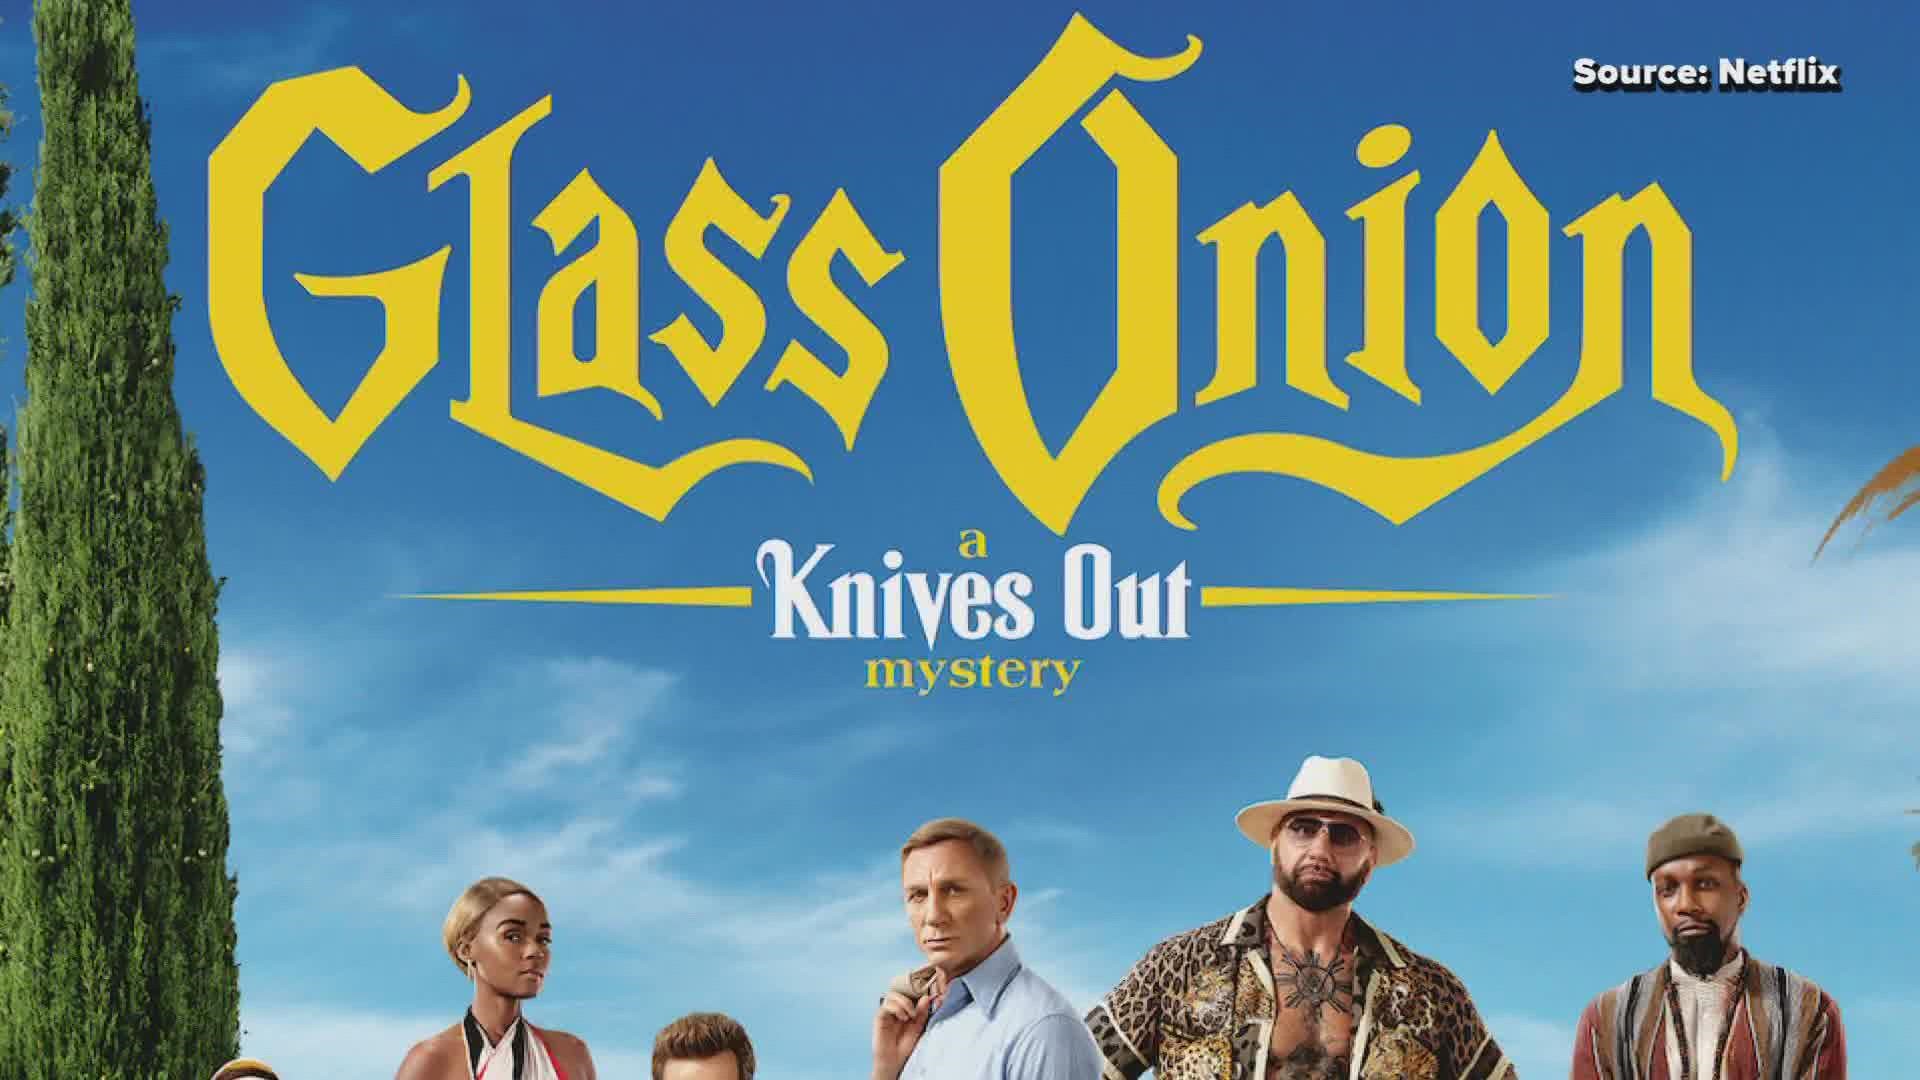 Glass Onion: A Knives Out Mystery is out now on Netflix!